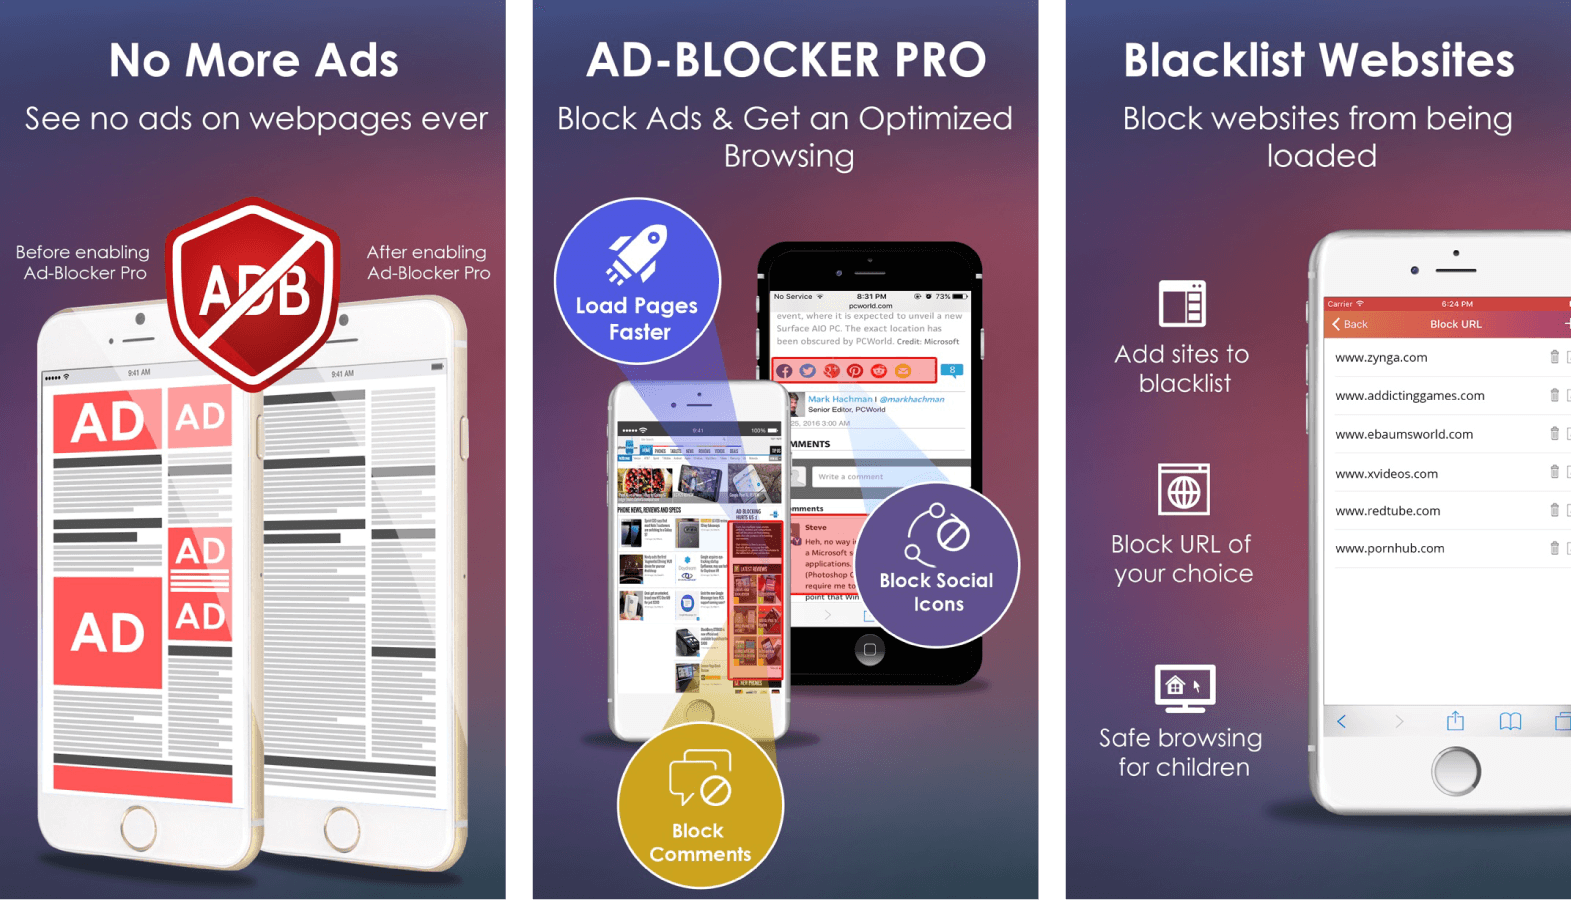 best ad-blockers for chrome, best ad blockers, best free ad blockers, best ad blocker apps, best ad blockers for android, best ad blockers for safari, best ad blockers for firefox, best ad blockers for ios, best ad blockers for iphone, best free ad blockers for chrome, best ad blockers for ipad, best ad blockers for mac, best ad blockers for google chrome, best mobile ad blockers, best youtube ad blockers, best ad blocker extensions for chrome, SaaS Blog, All That SaaS